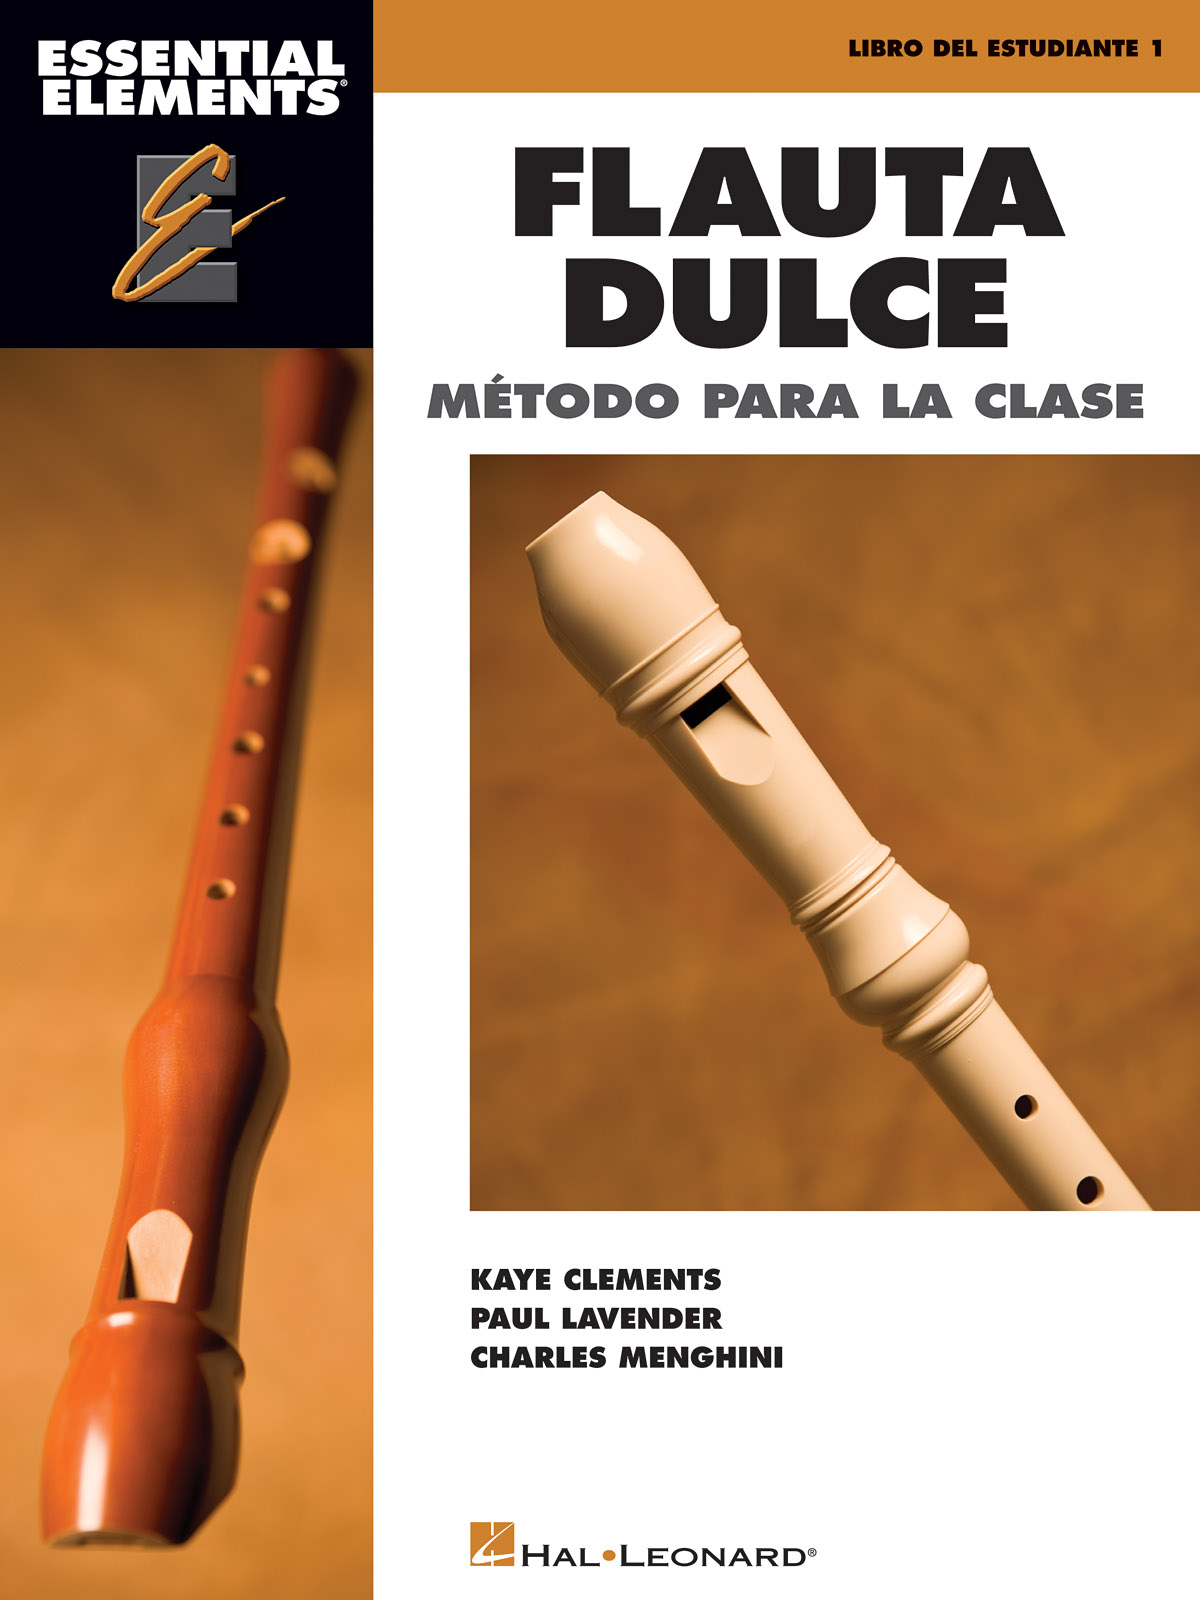 Essential Elements Flauta Dulce - Spanish edition of Essential Elements for Recorder - na zobcovou flétnu